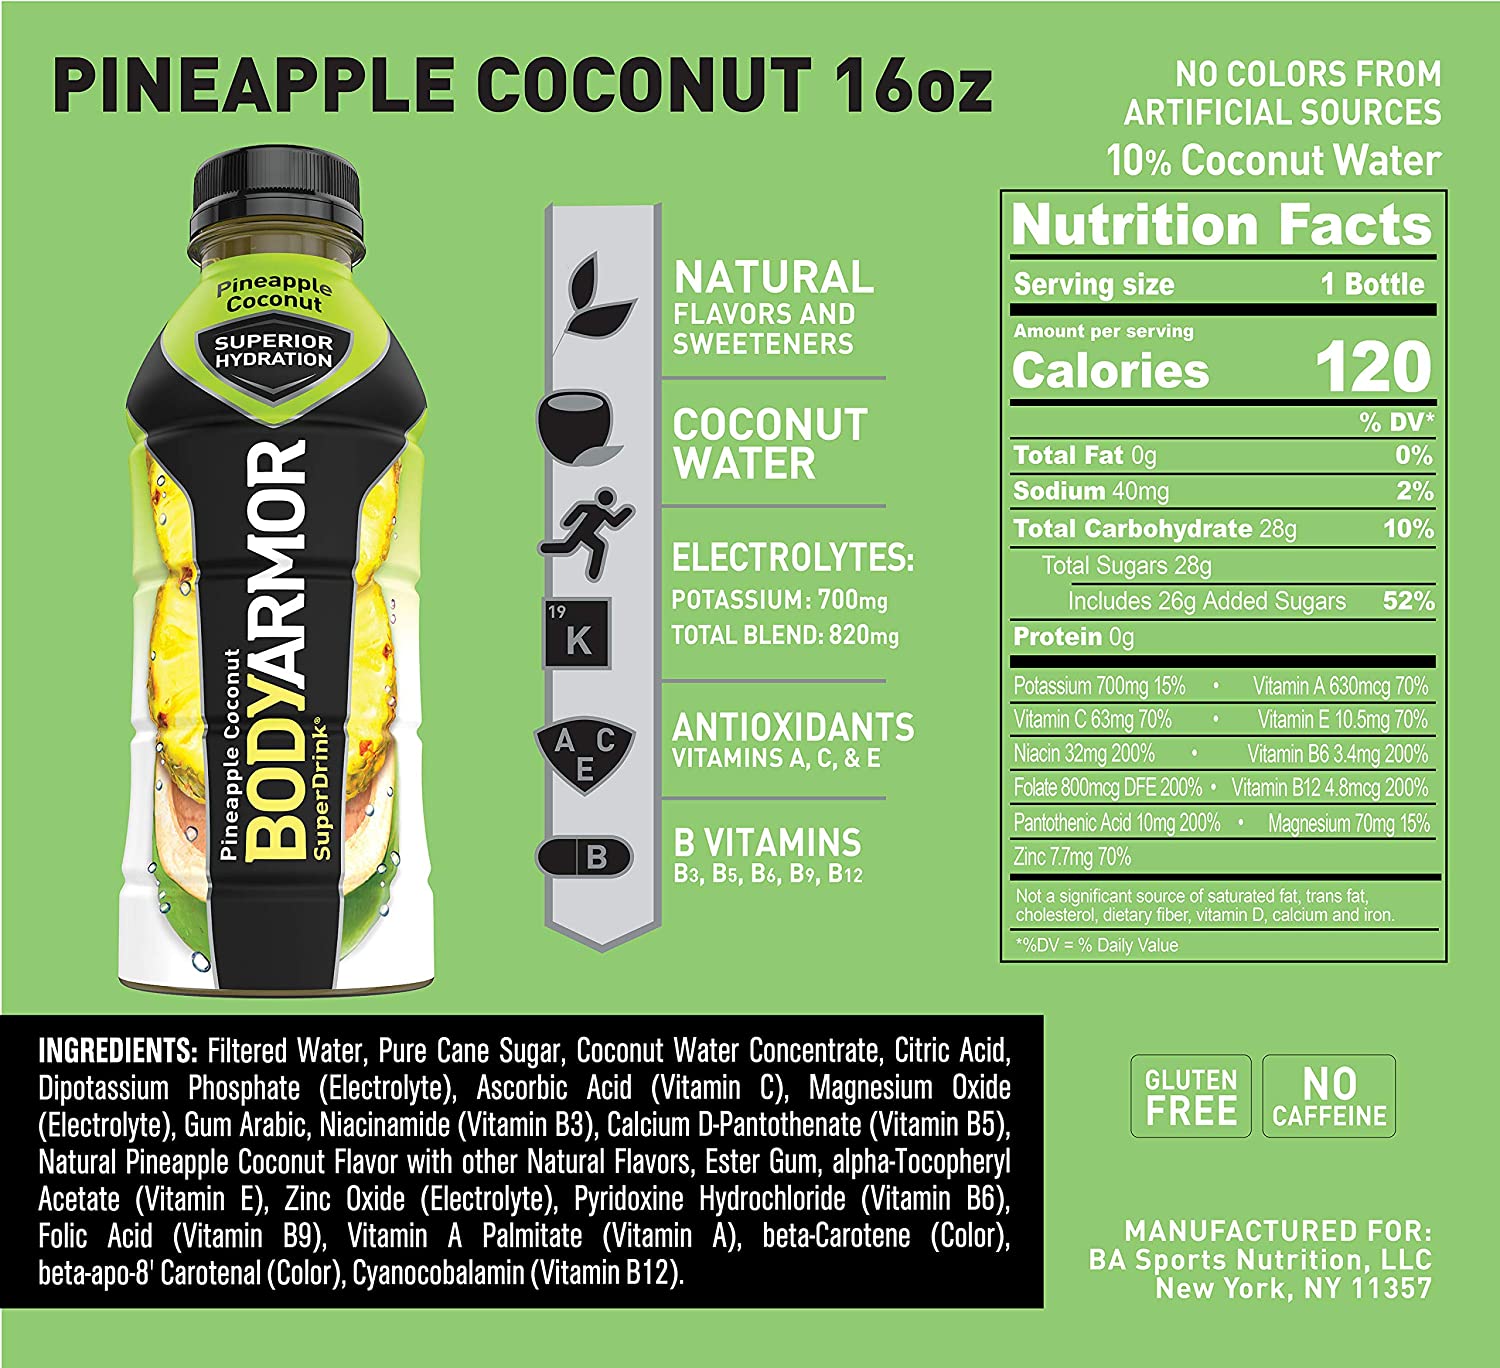 Pineapple Coconut Body Armor Lyte Nutrition Facts Cully s Kitchen